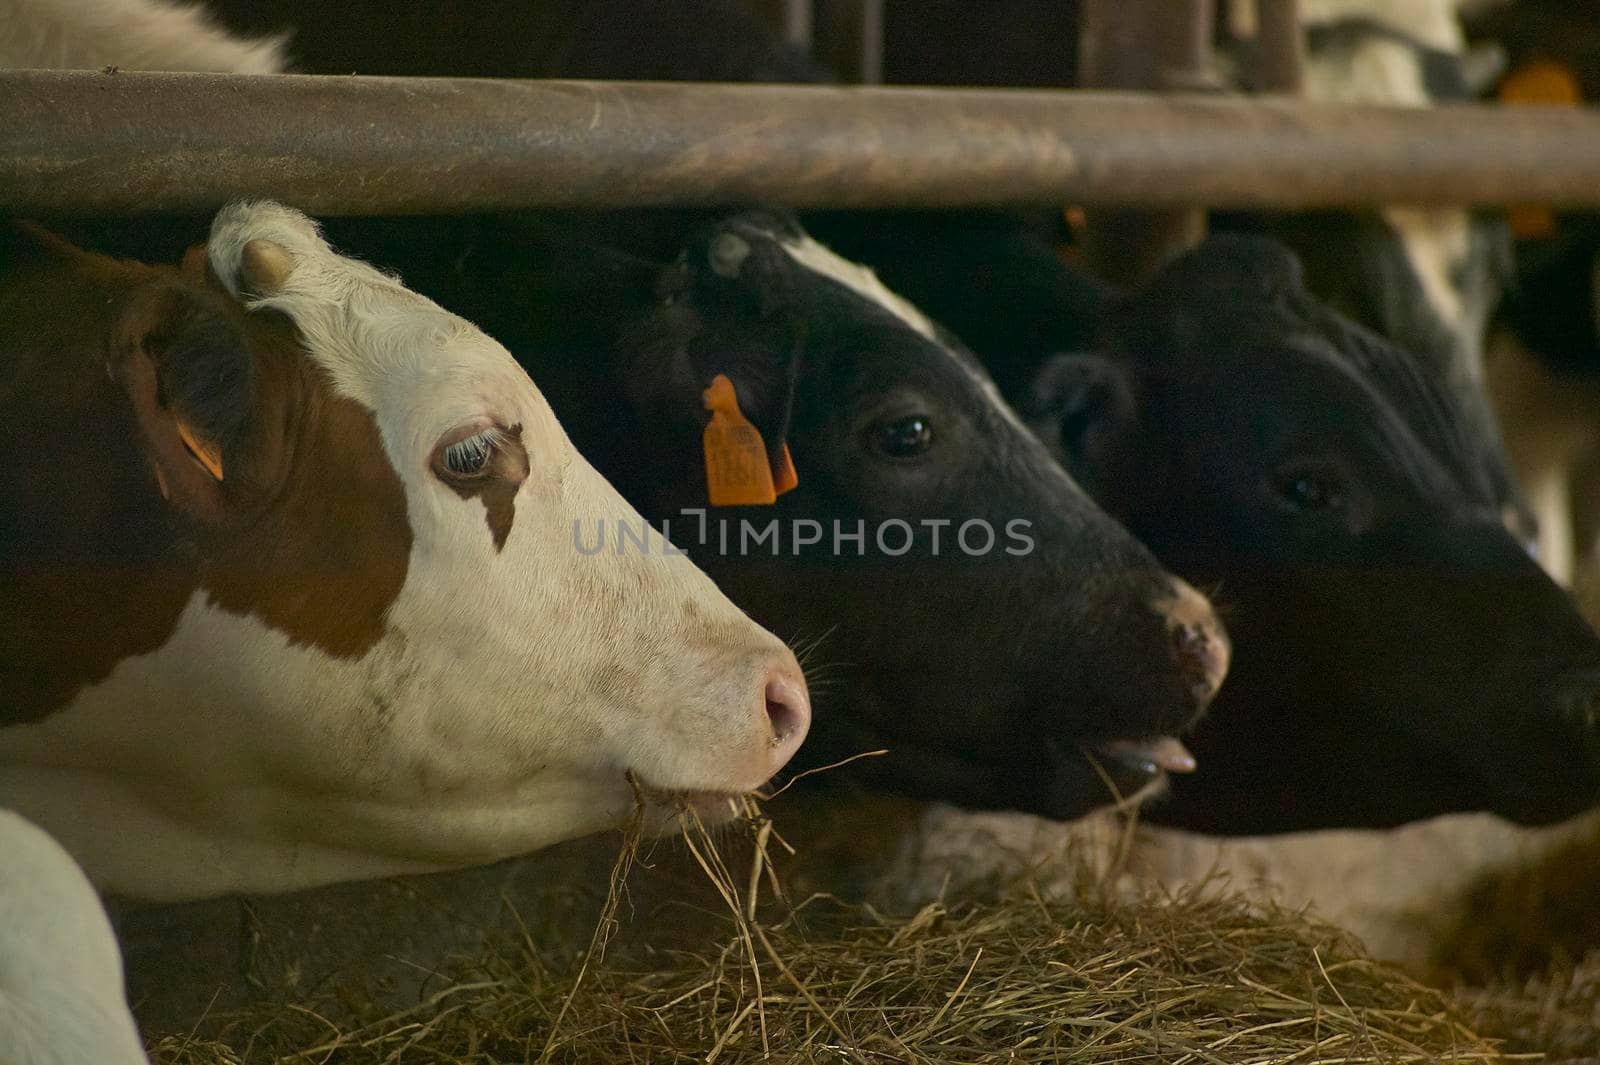 Detail of Cows in the herd in a farm